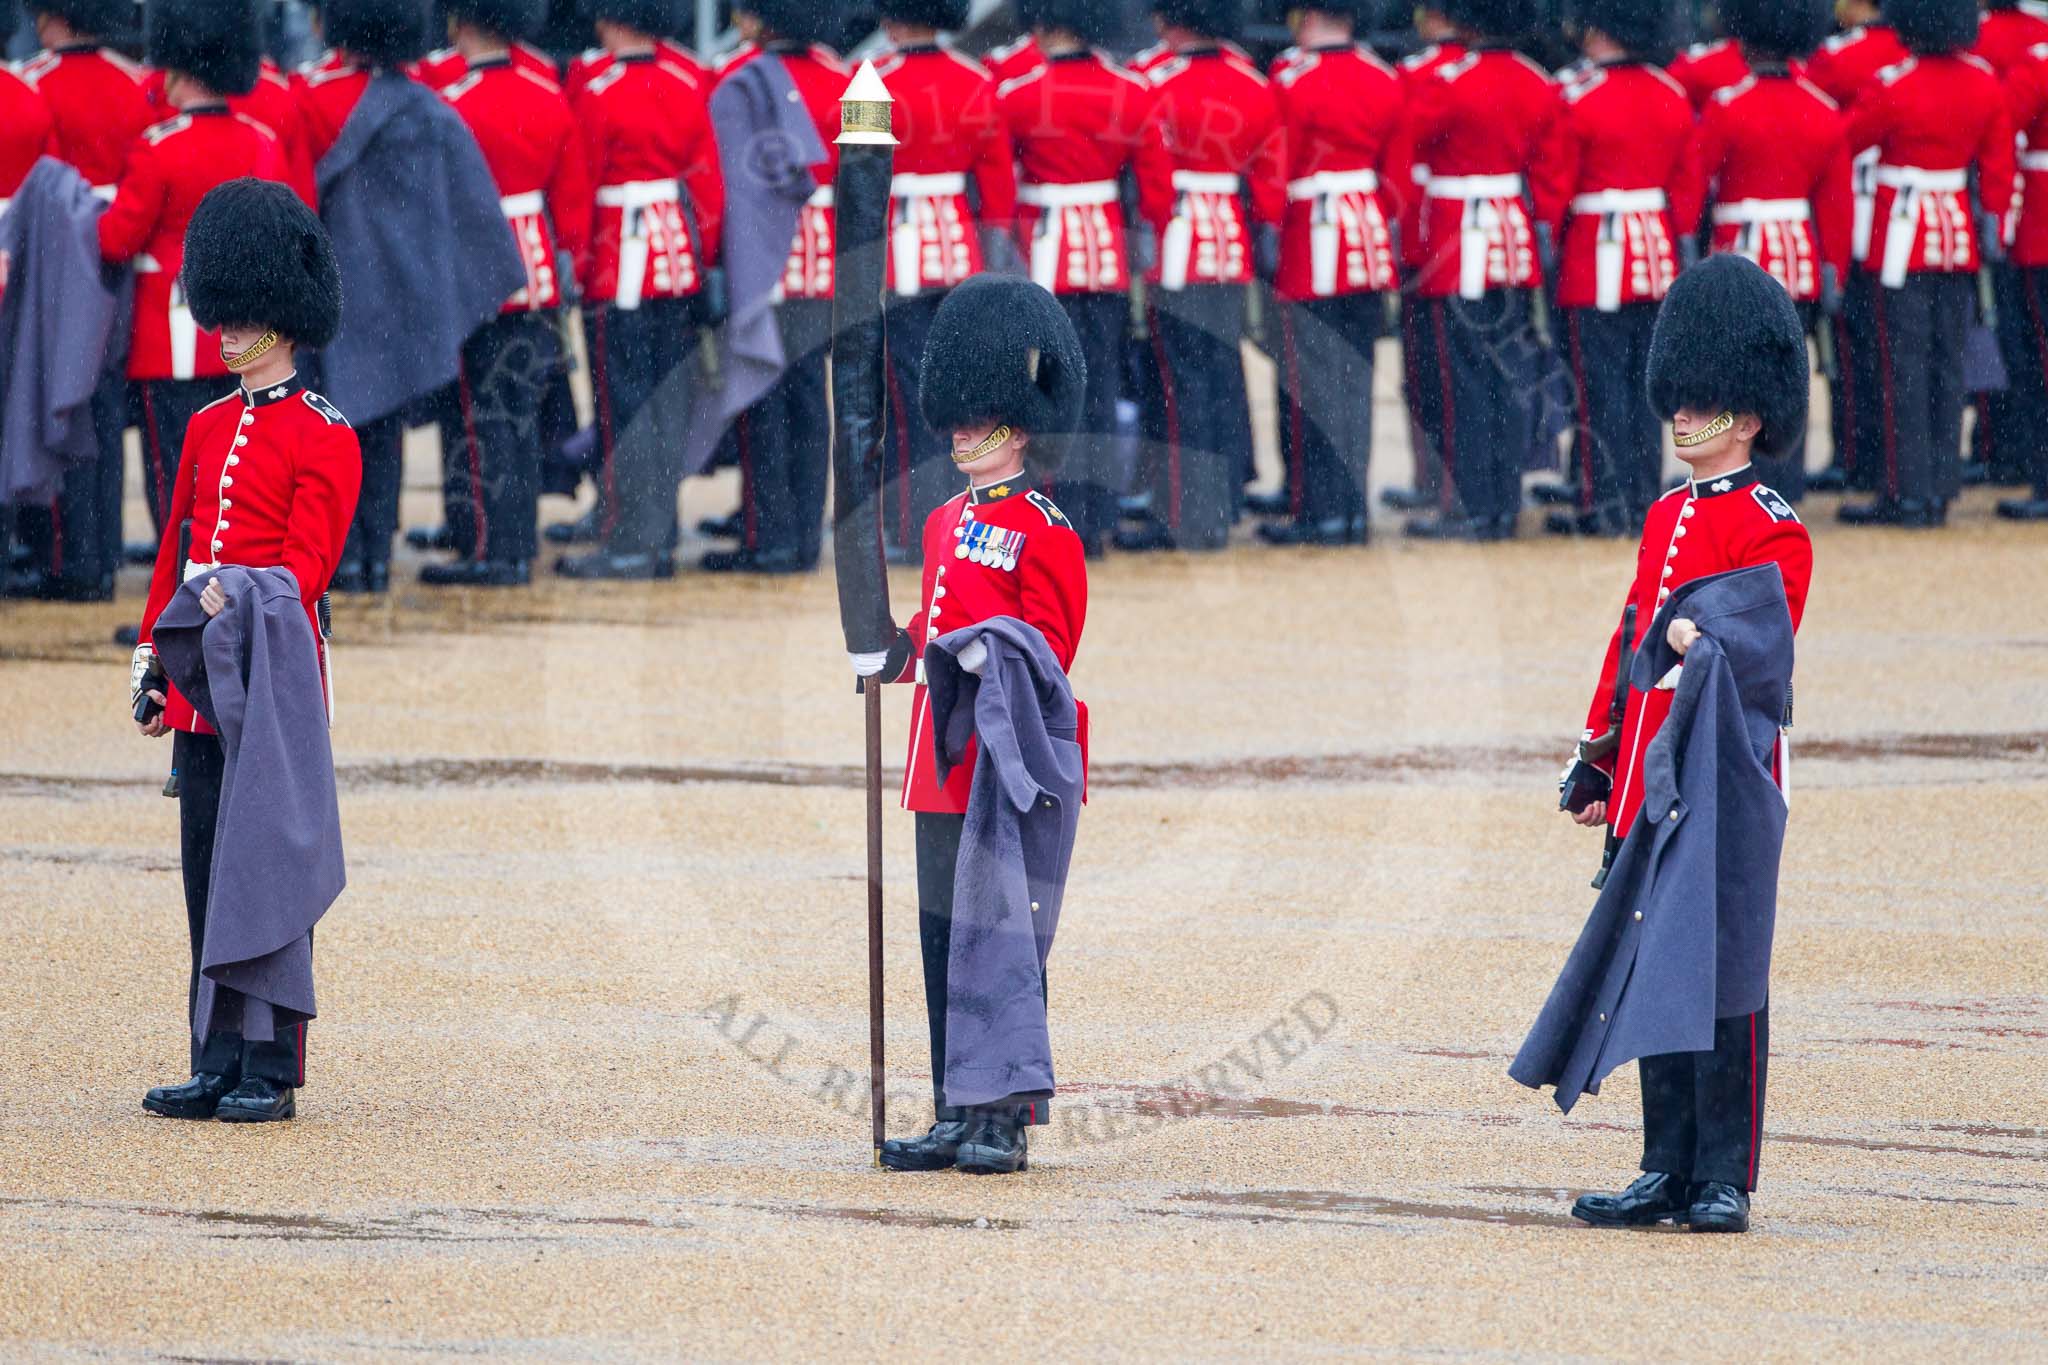 The Colonel's Review 2014.
Horse Guards Parade, Westminster,
London,

United Kingdom,
on 07 June 2014 at 10:25, image #113